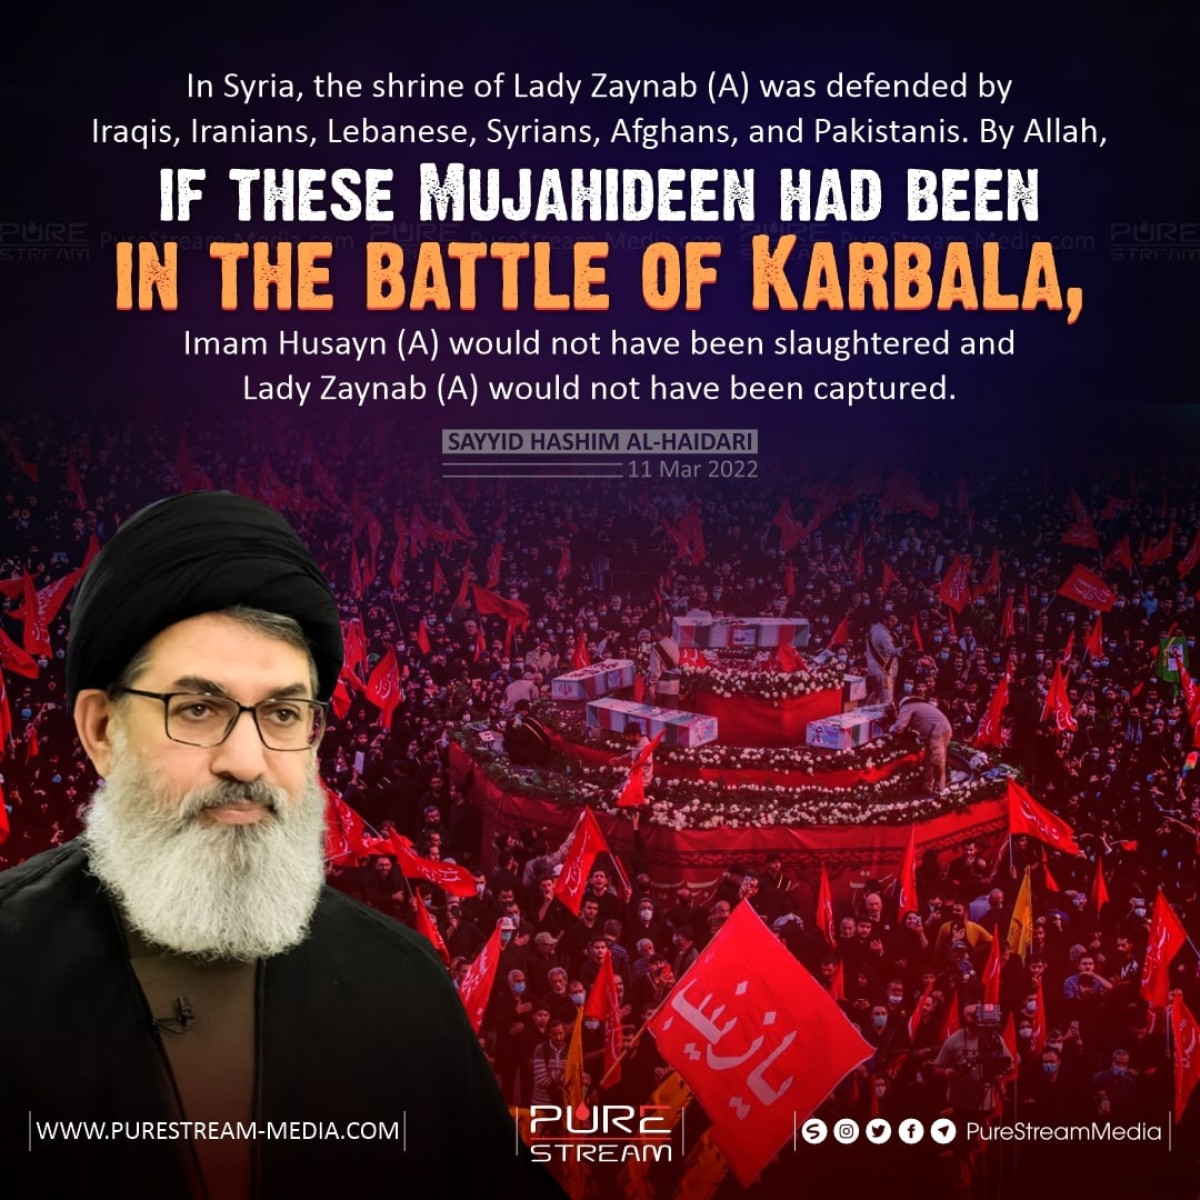 In Syria, the shrine of Lady Zaynab (A) was defended by Iraqis, Iranians, Lebanese, Syrians, Afghans, and Pakistanis